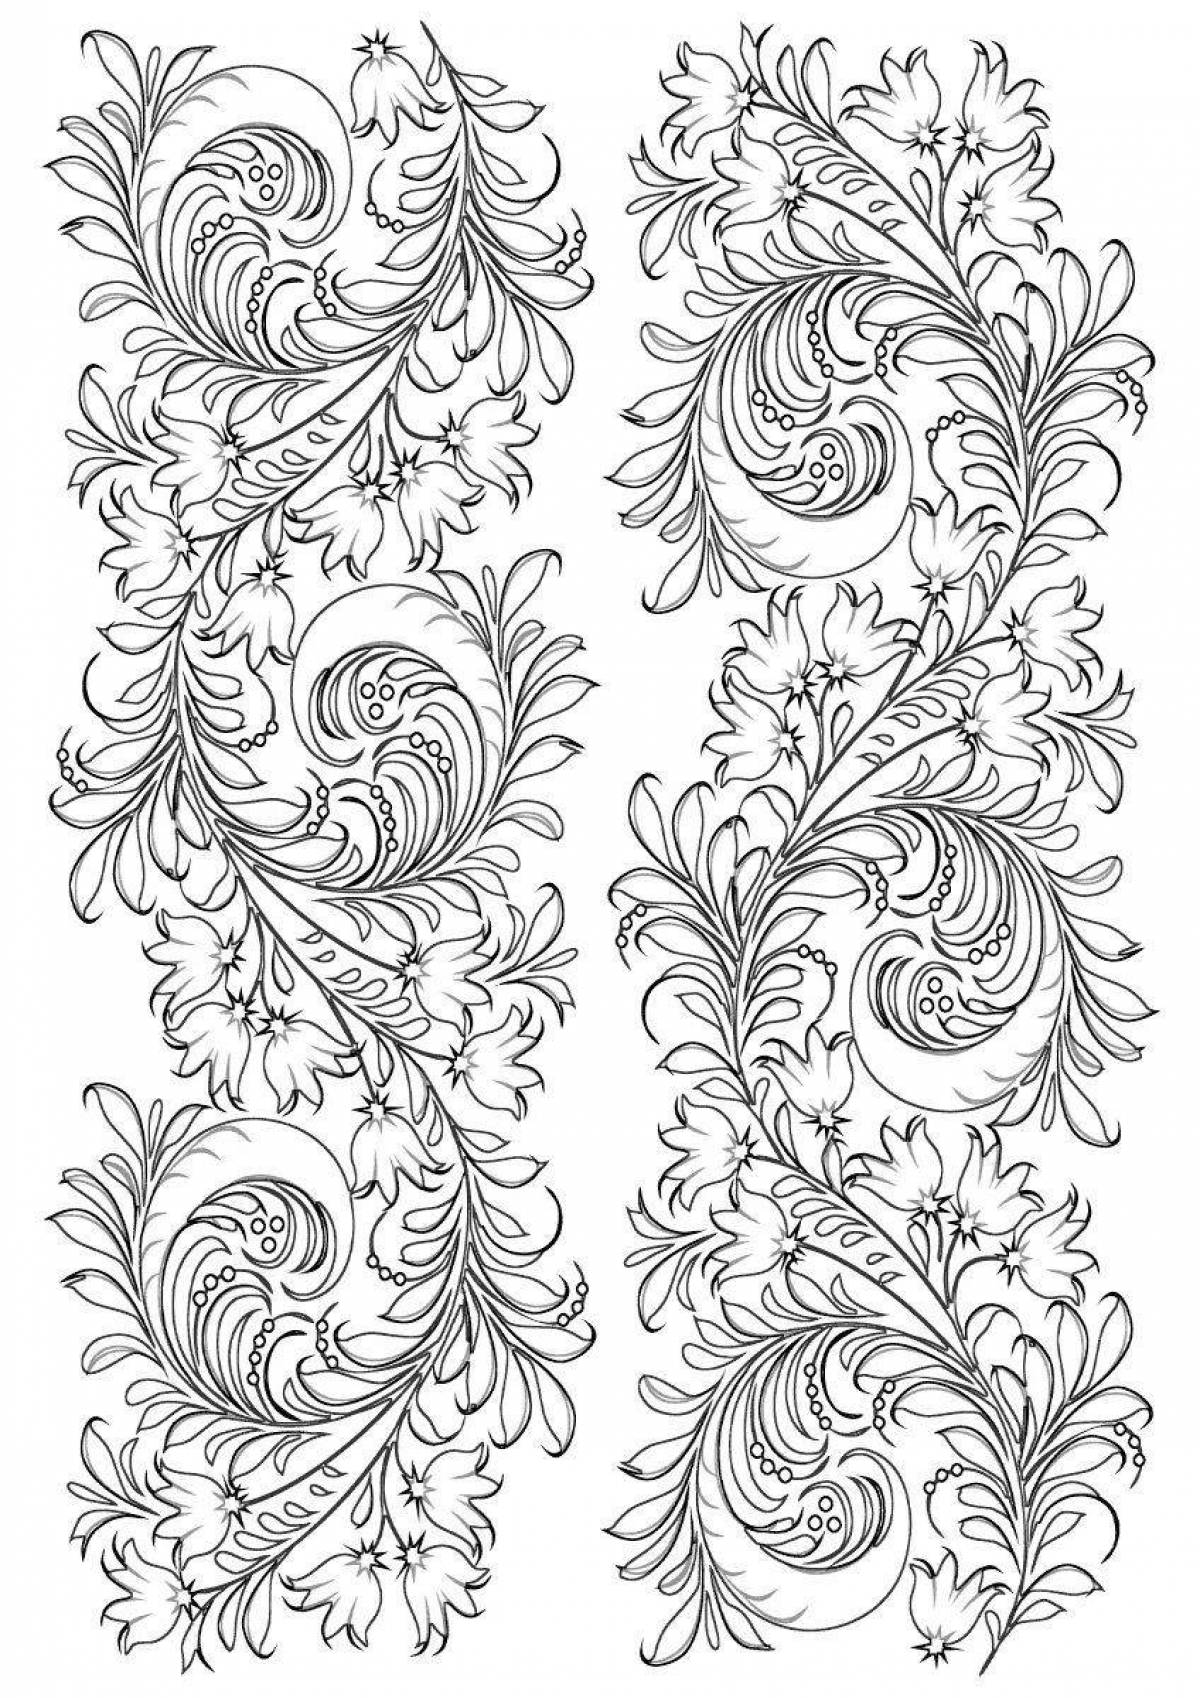 Fun coloring pages frosty patterns